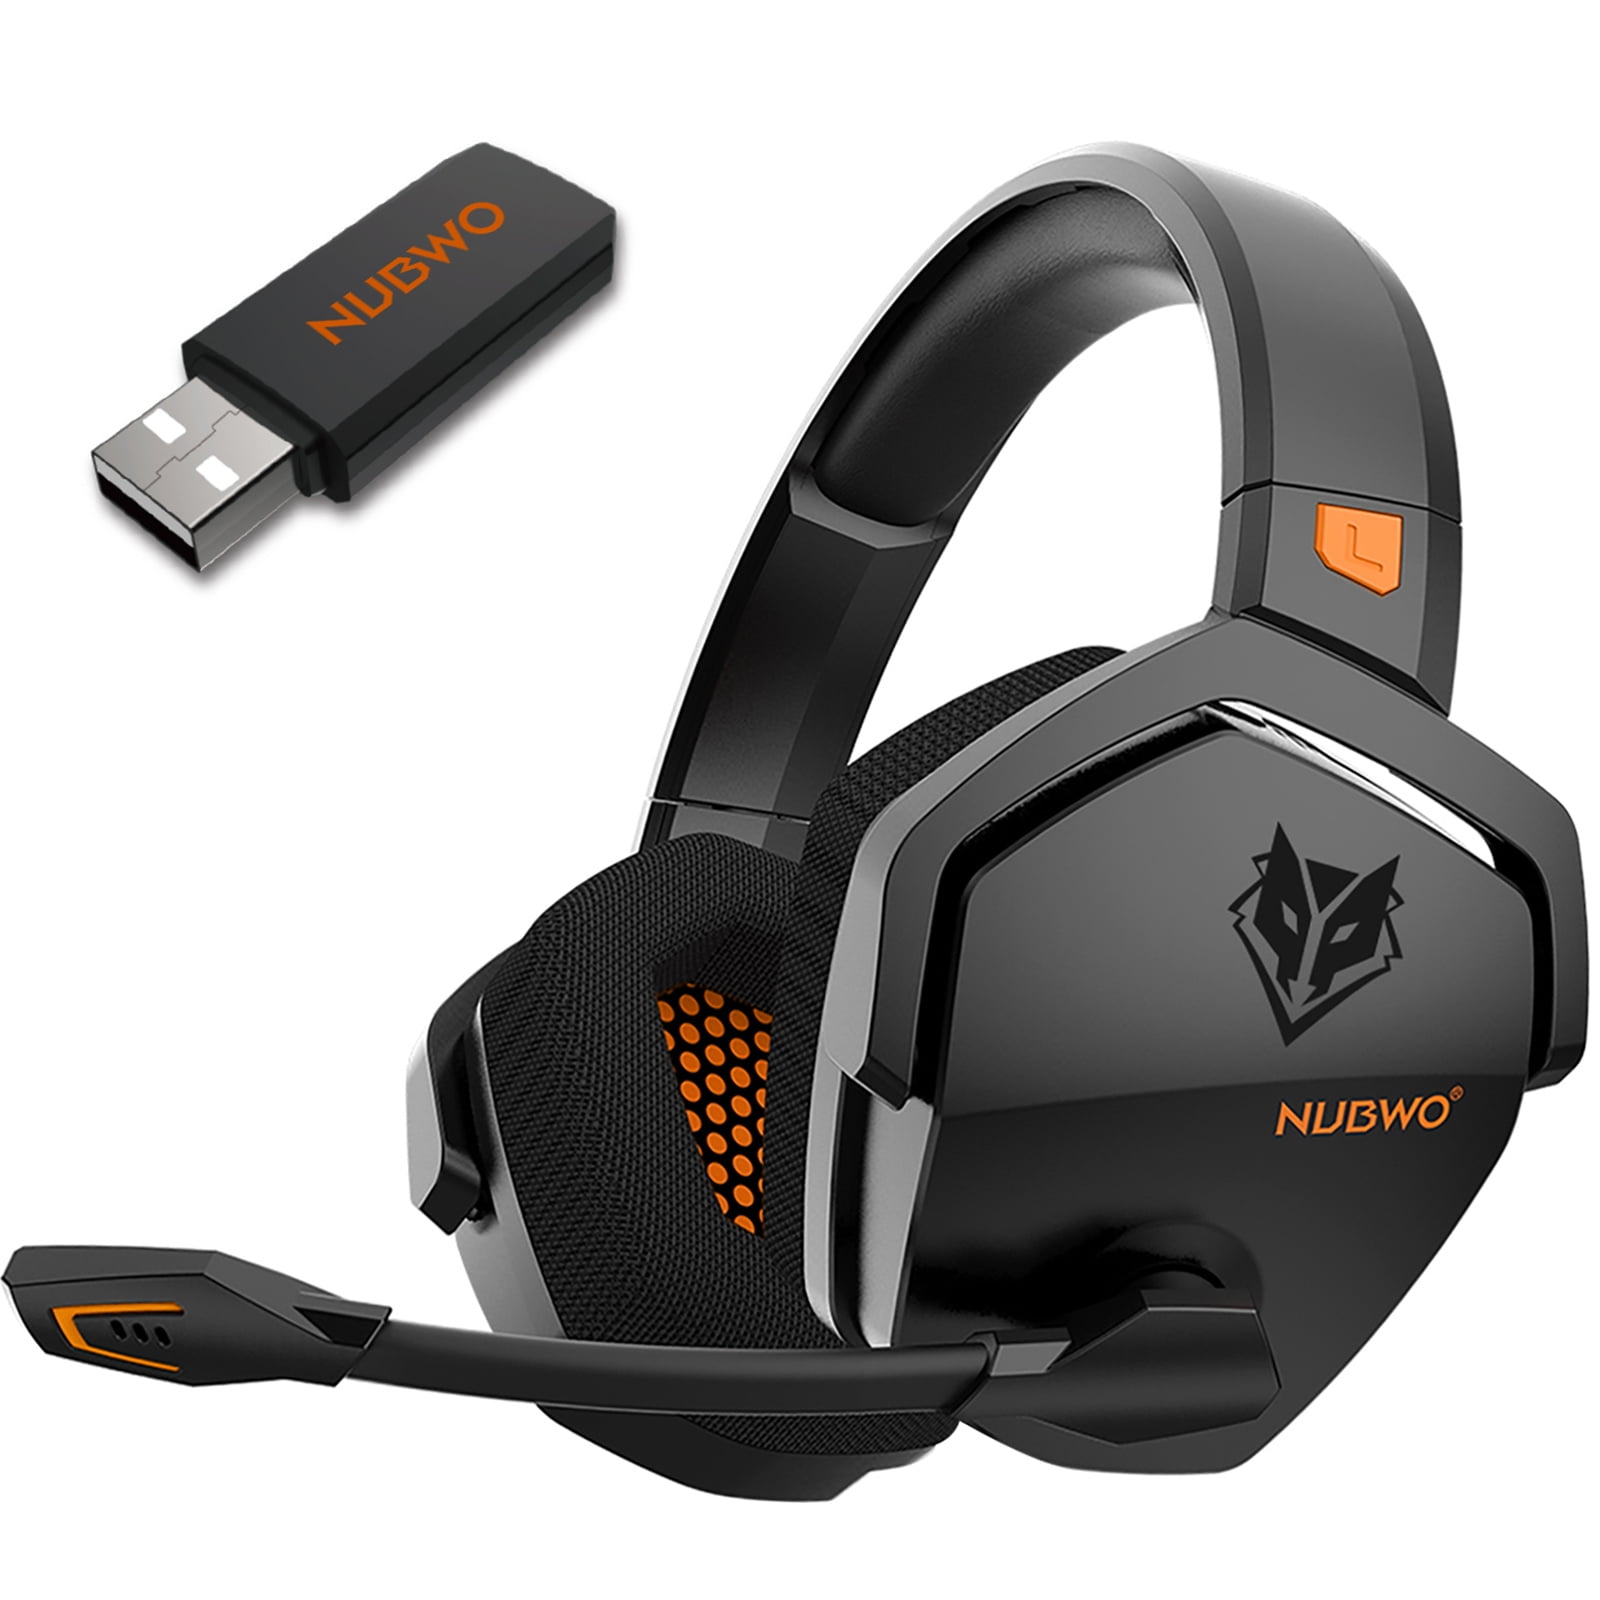 on wireless 2.4GHz lightweight PC Mac and WIRELESS Gaming and Bluetooth®, audio, White sound HS65 7.1 low-latency surround Dolby® Headset, Corsair Audio with construction,